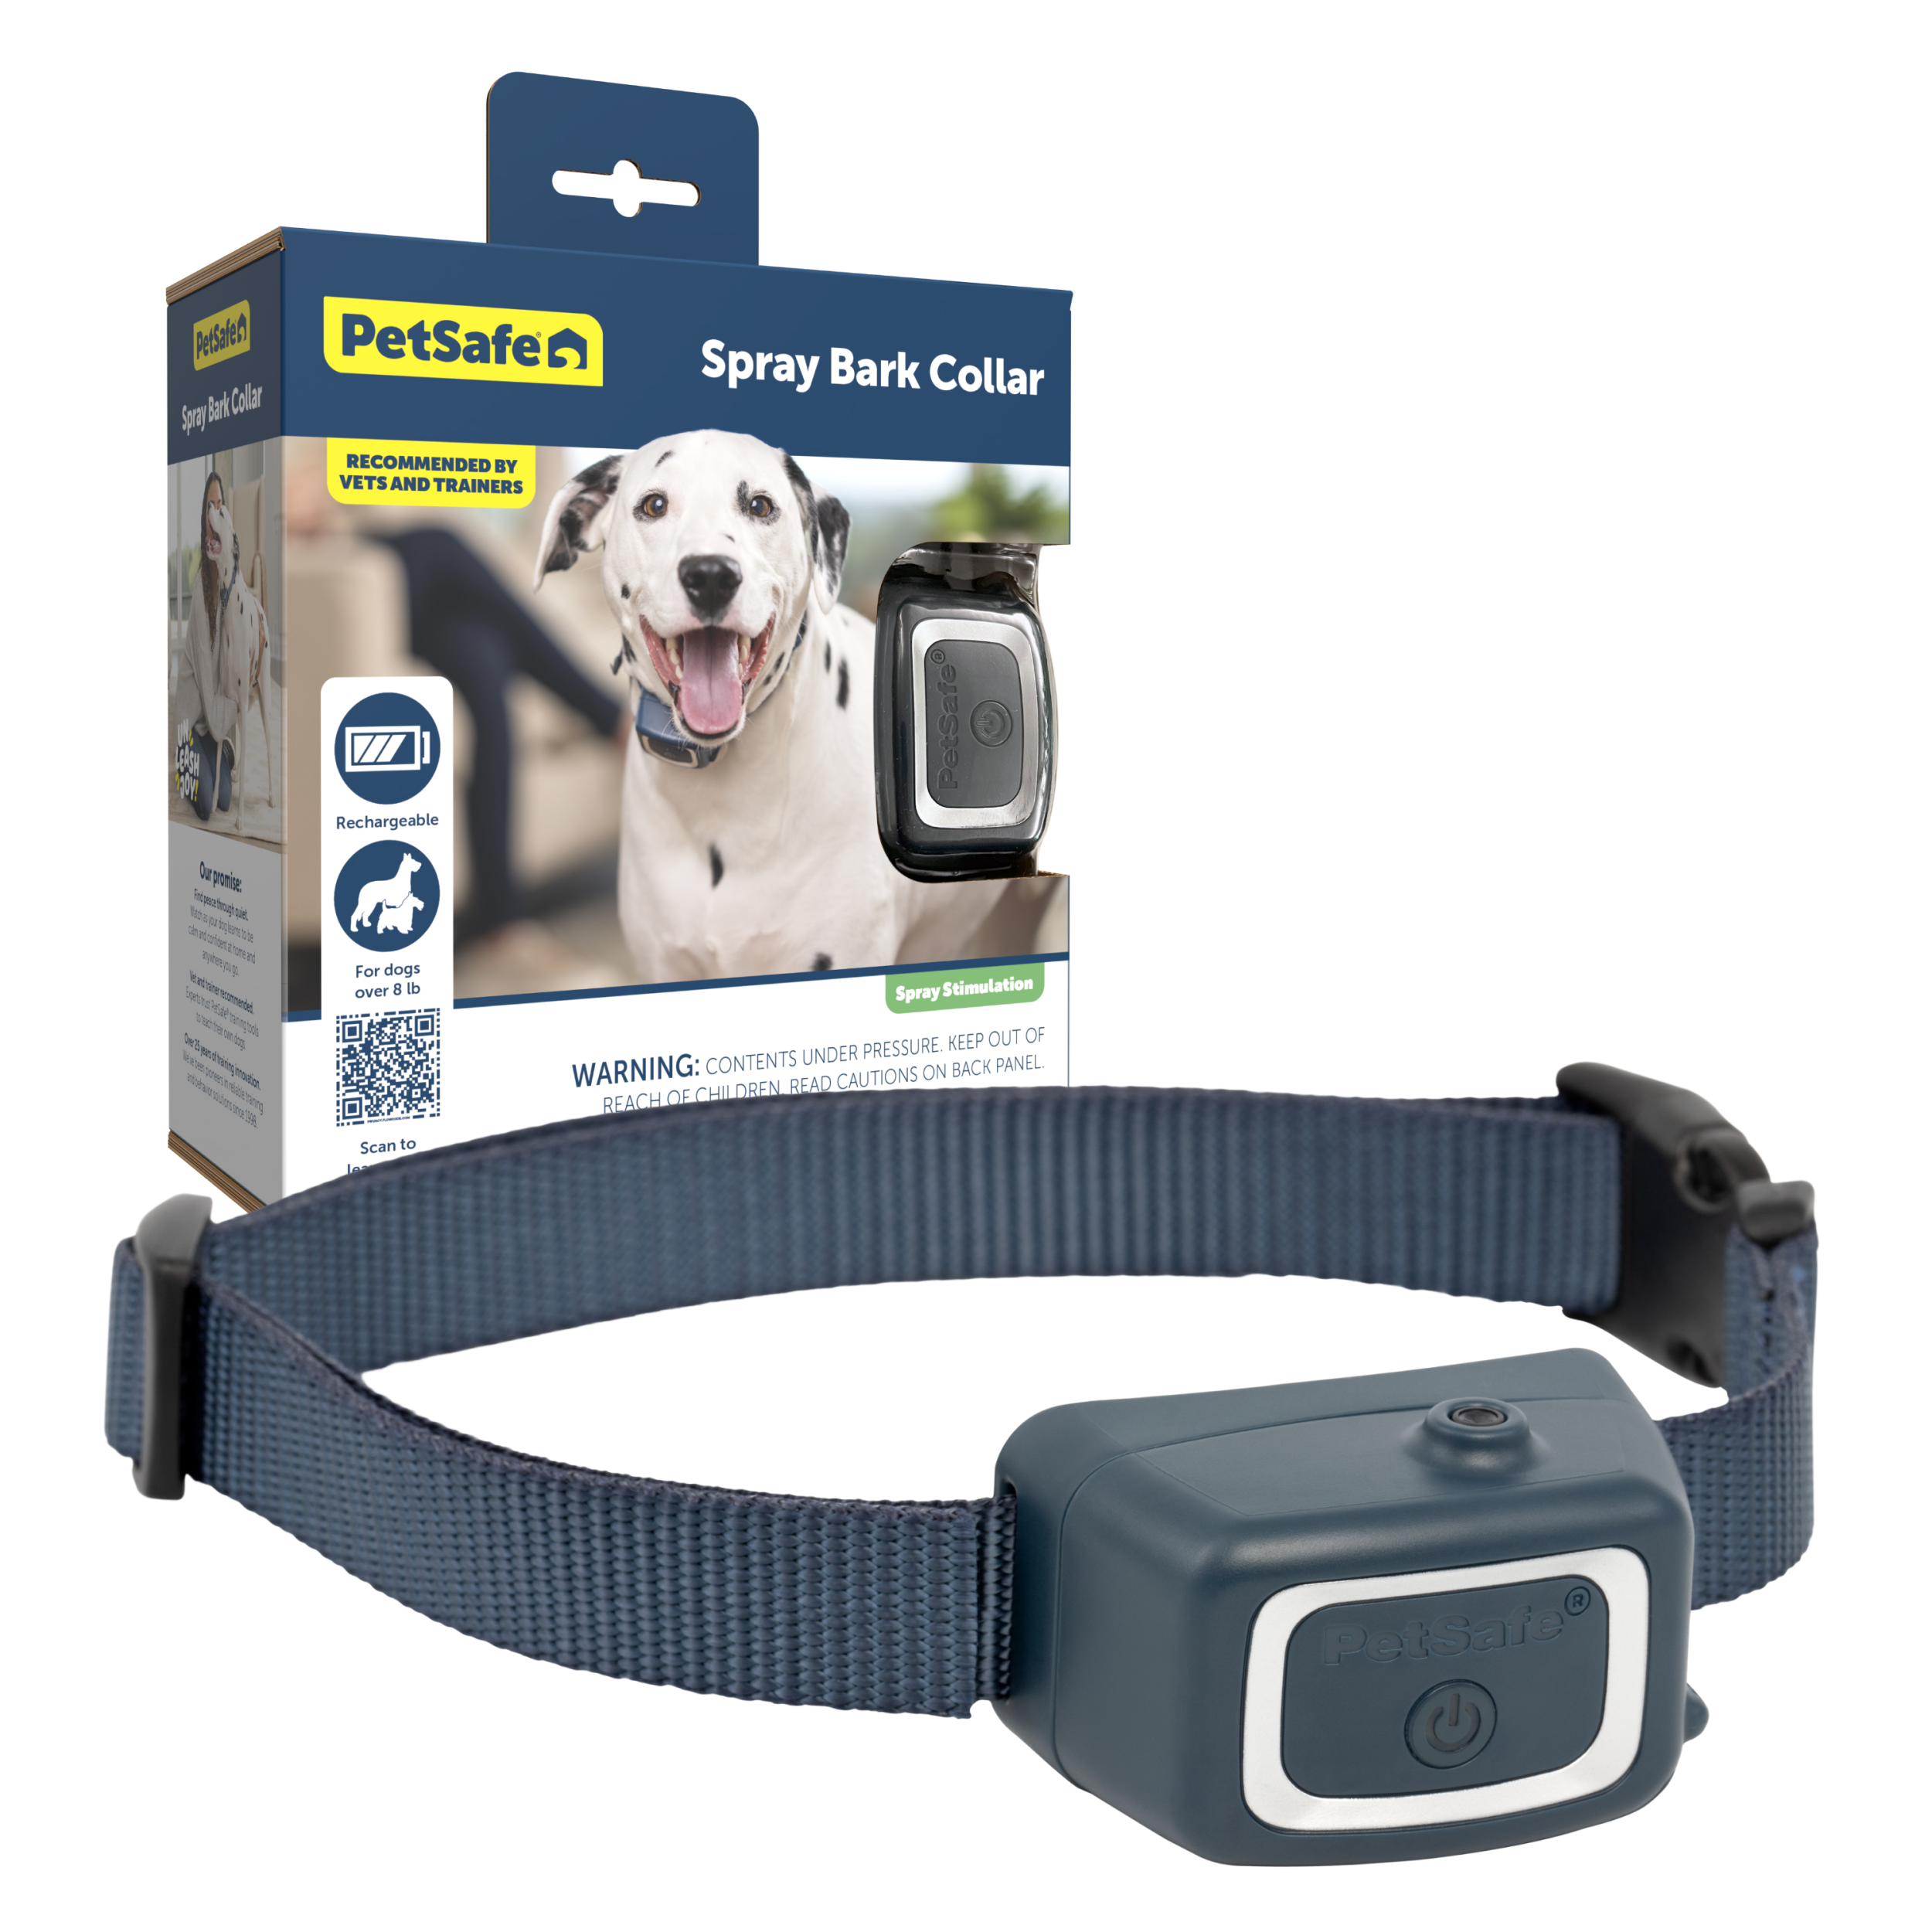 5 Top Citronella Collars For Dogs To Help With Excessive Barking